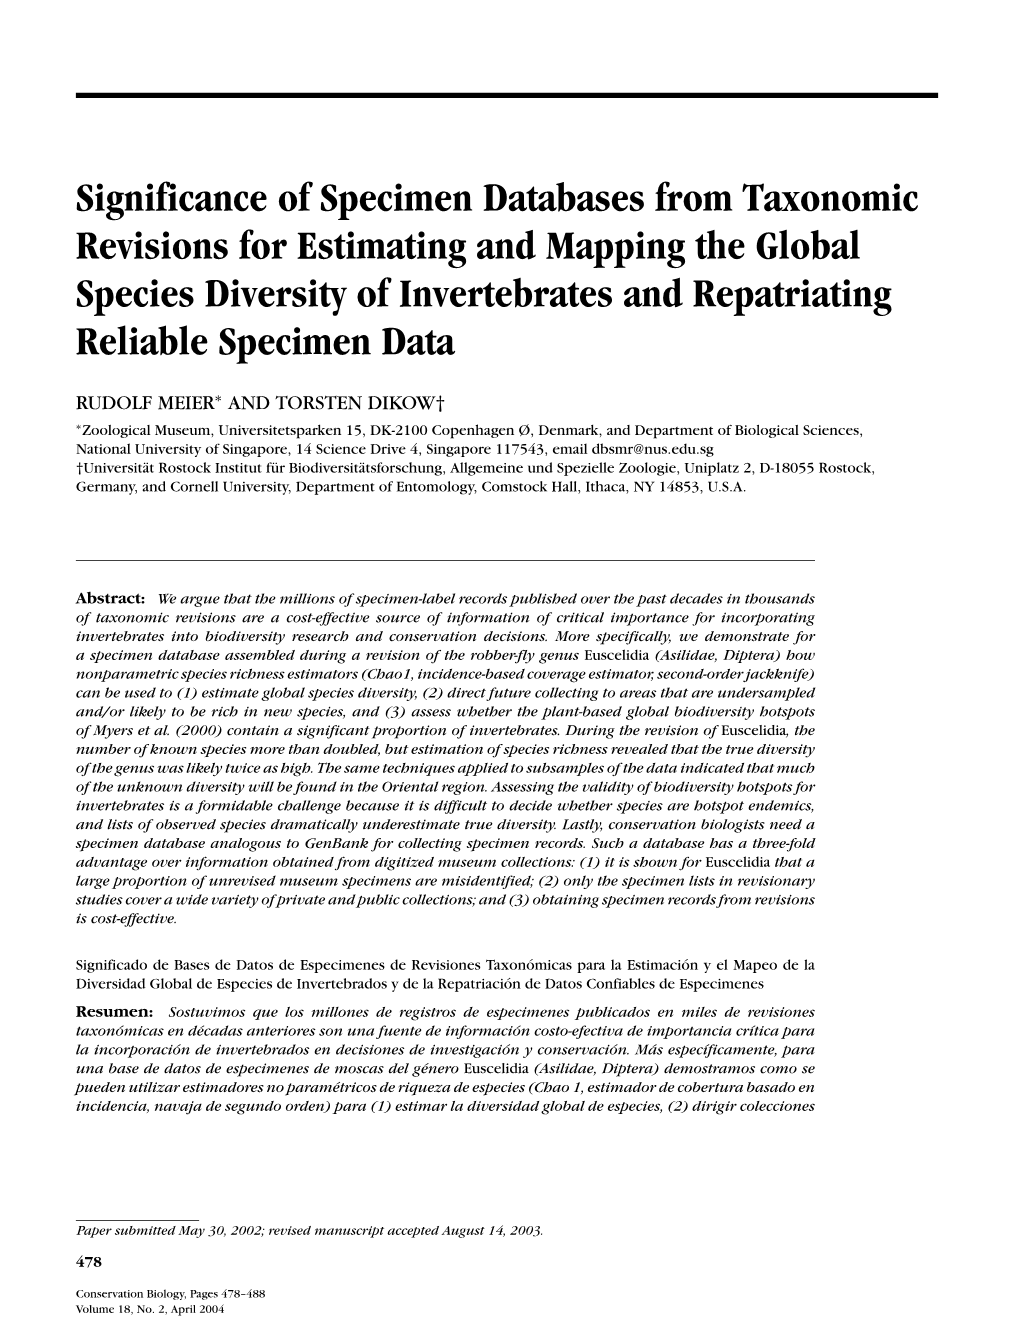 Significance of Specimen Databases from Taxonomic Revisions For